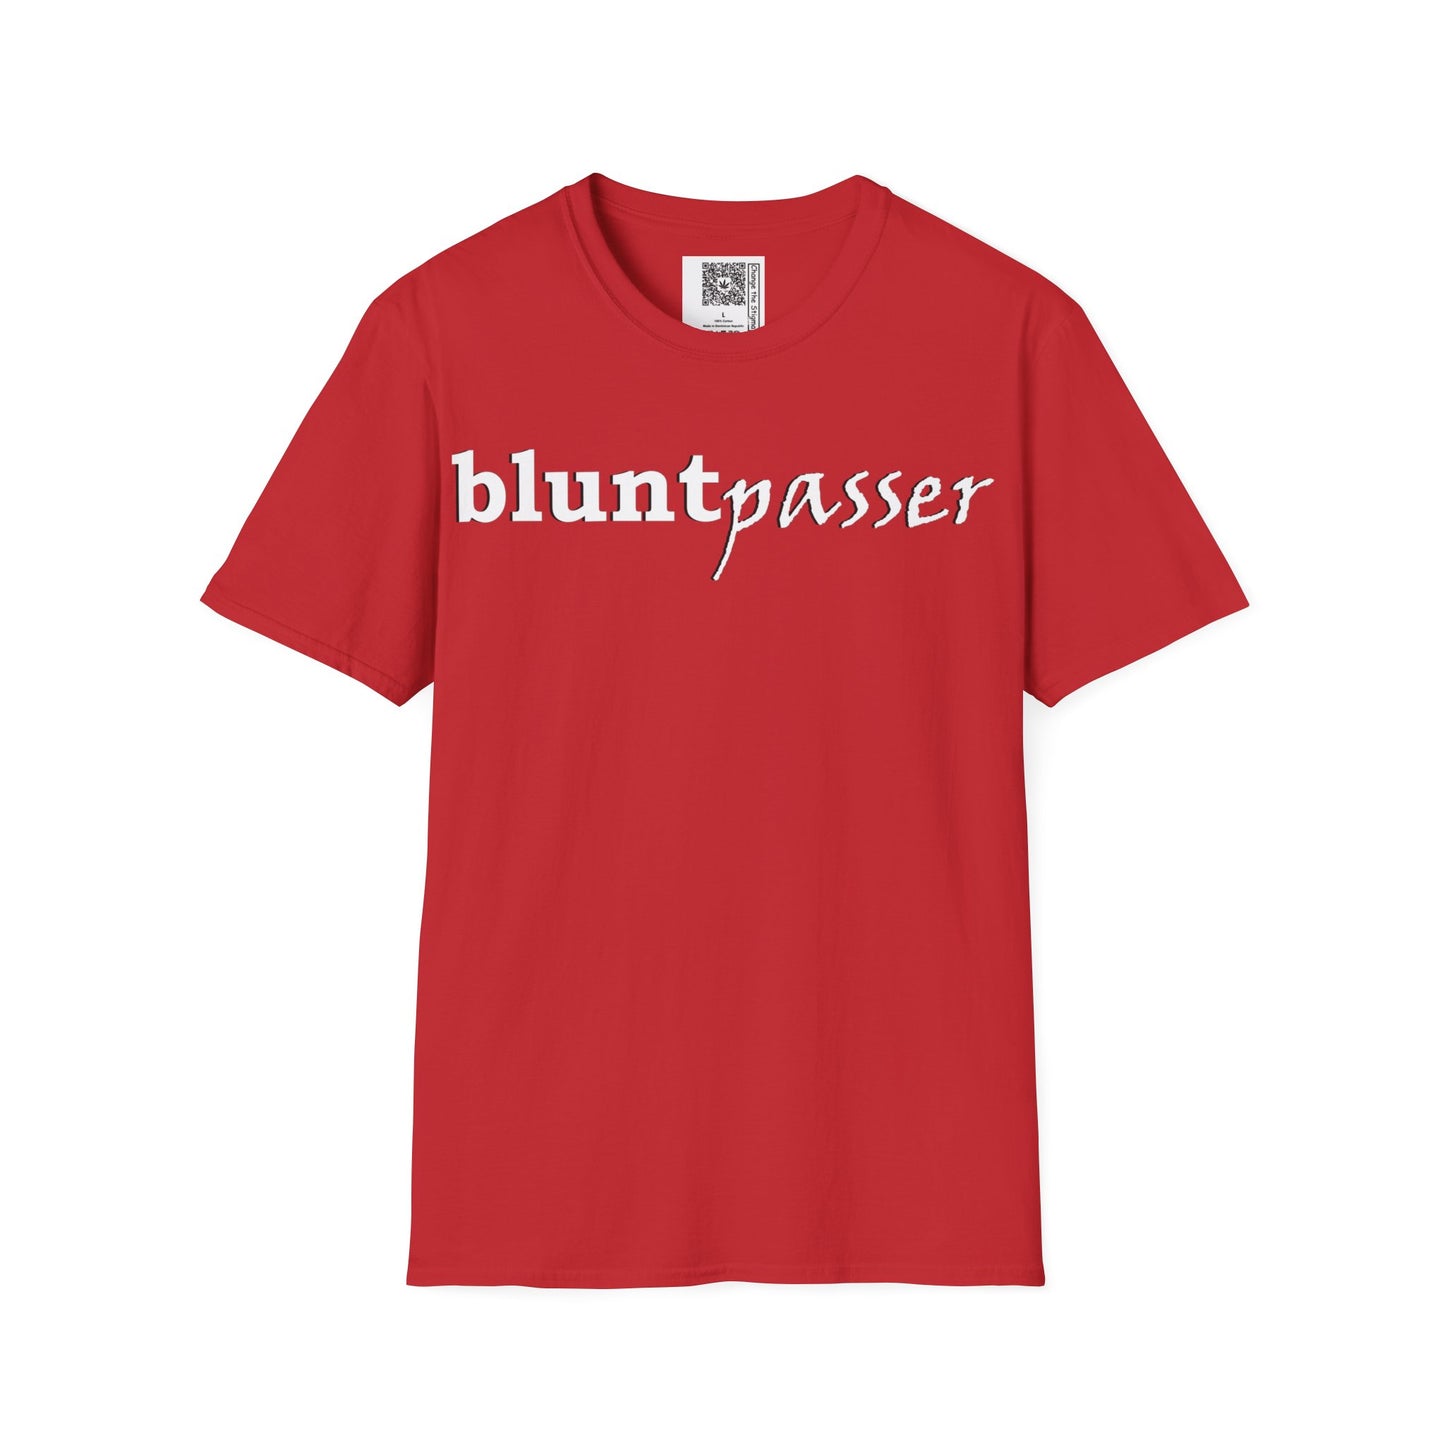 Change the Stigma, Red color, shirt saying "blunt passer", Shirt is open displayed, Qr code is shown neck tag